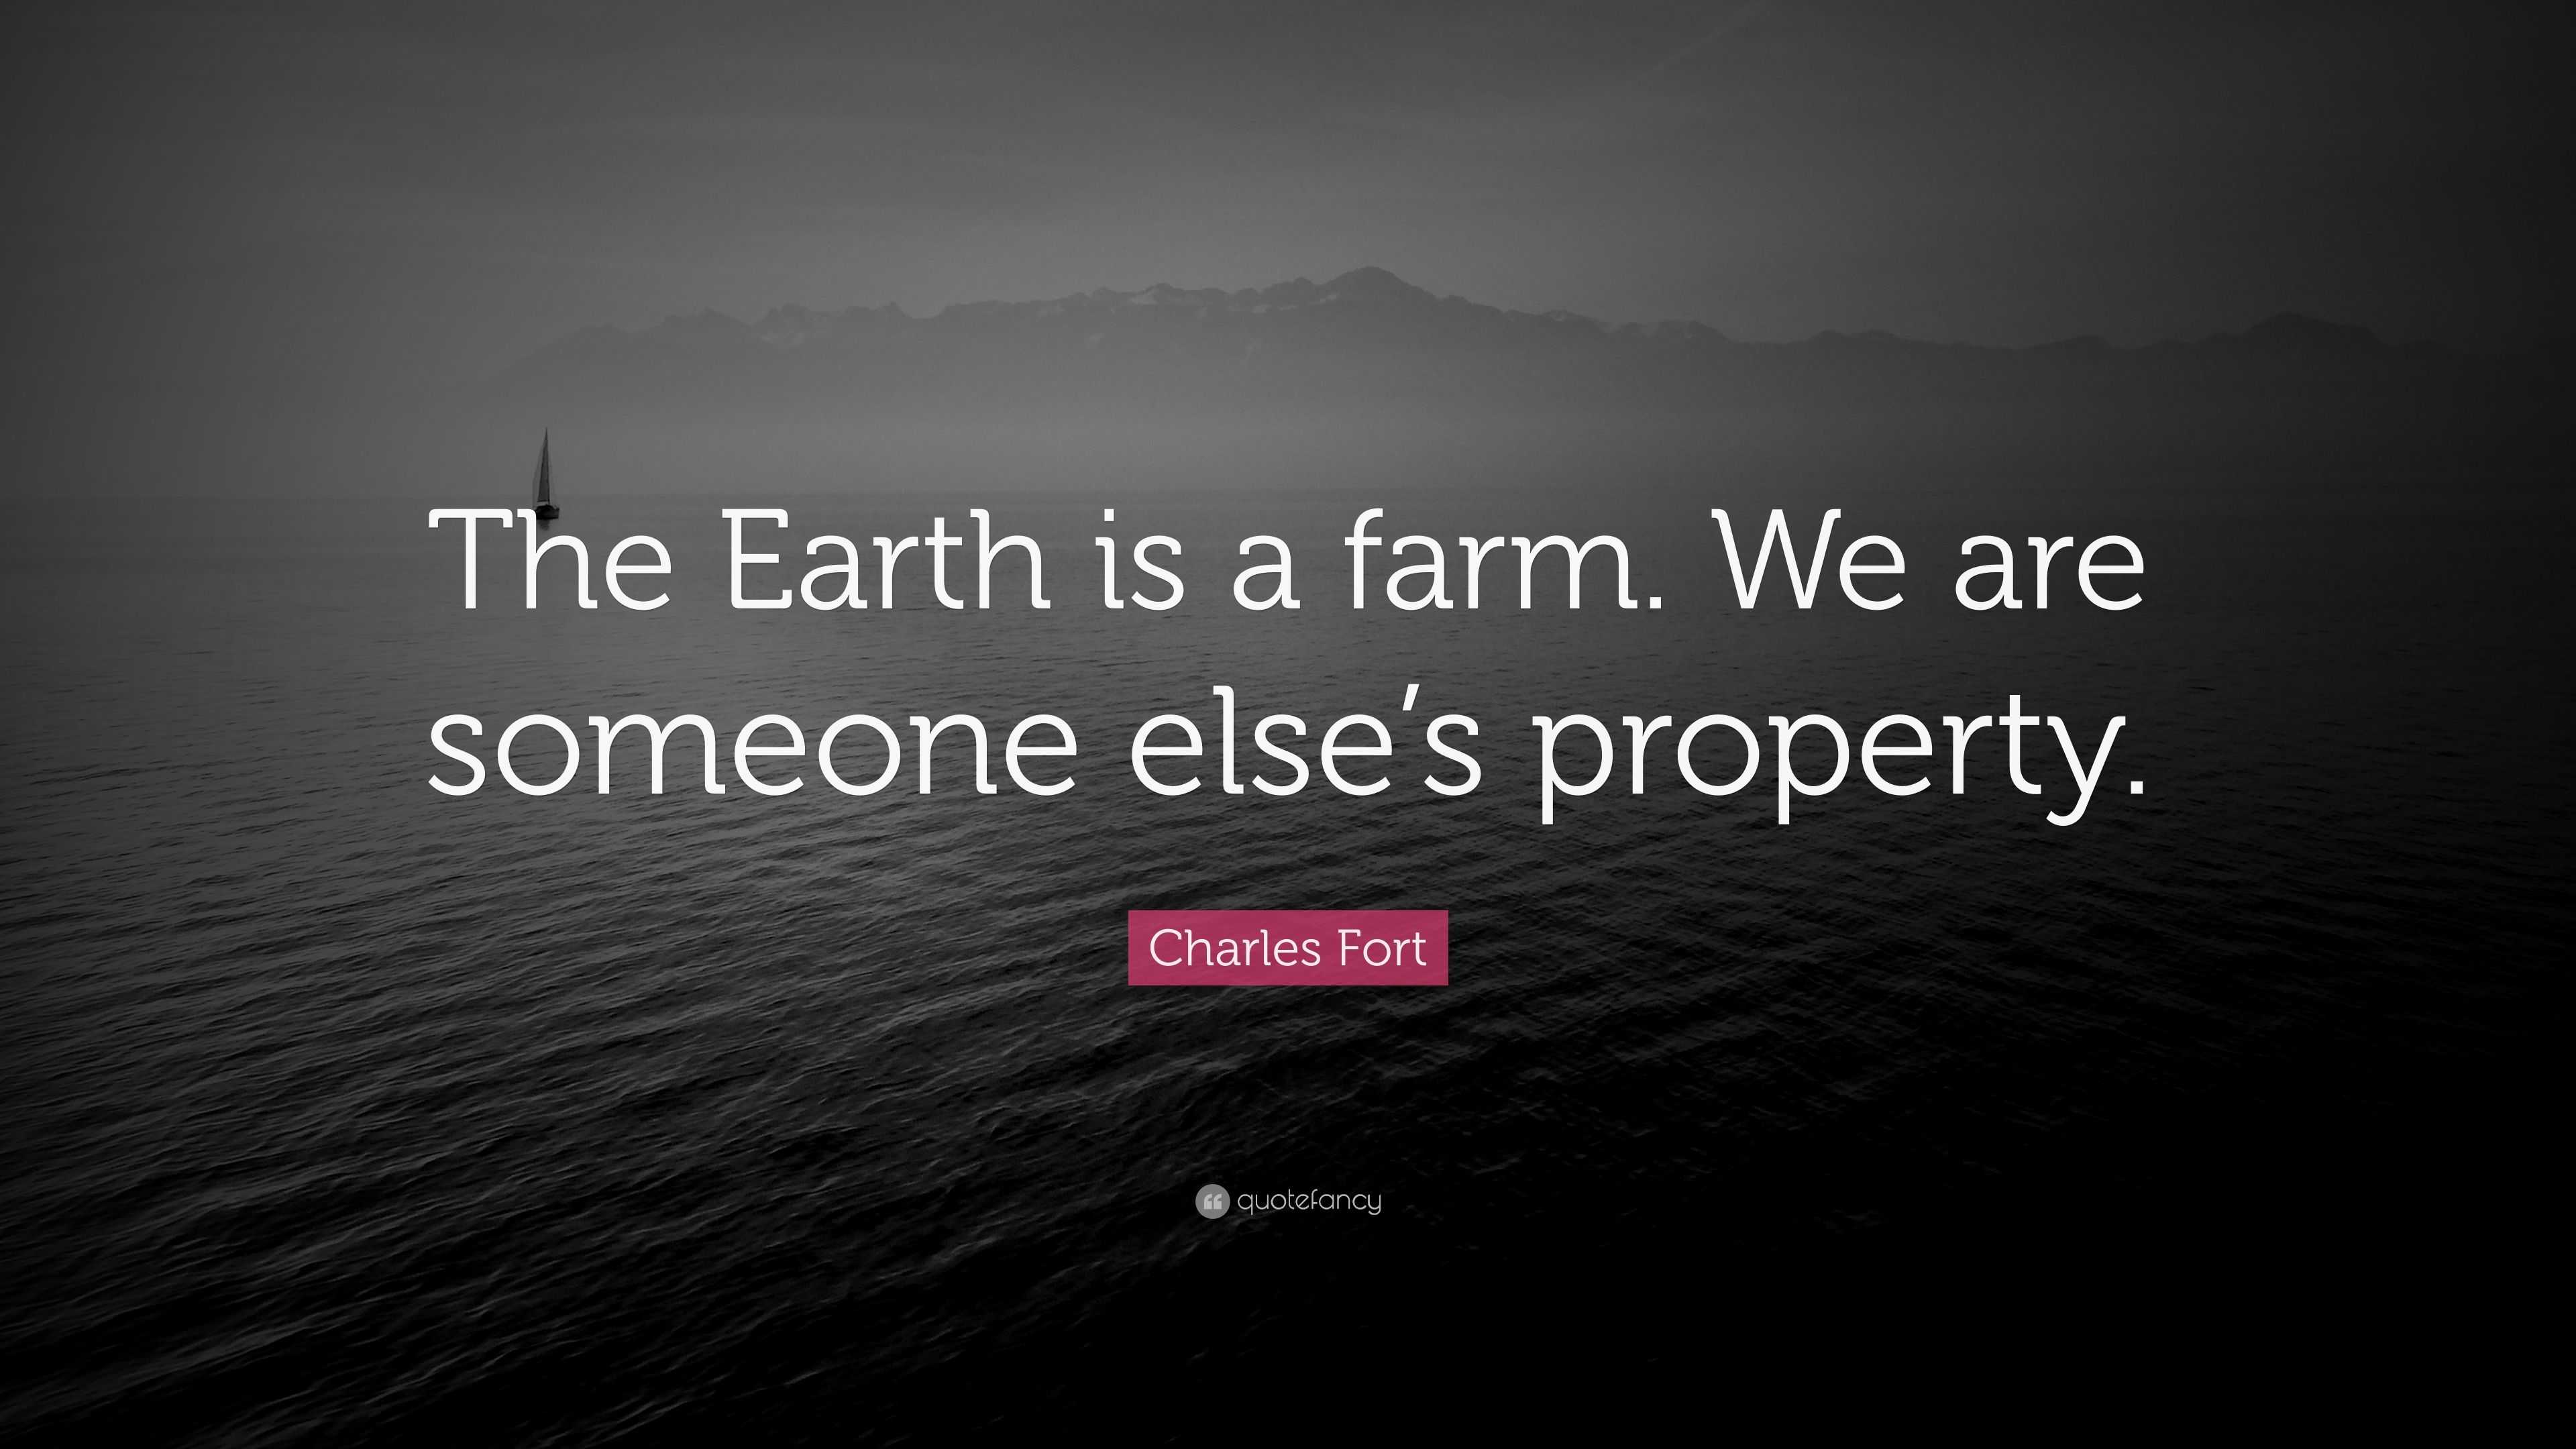 Charles Fort Quote: “The Earth is a farm. We are someone else's property.”